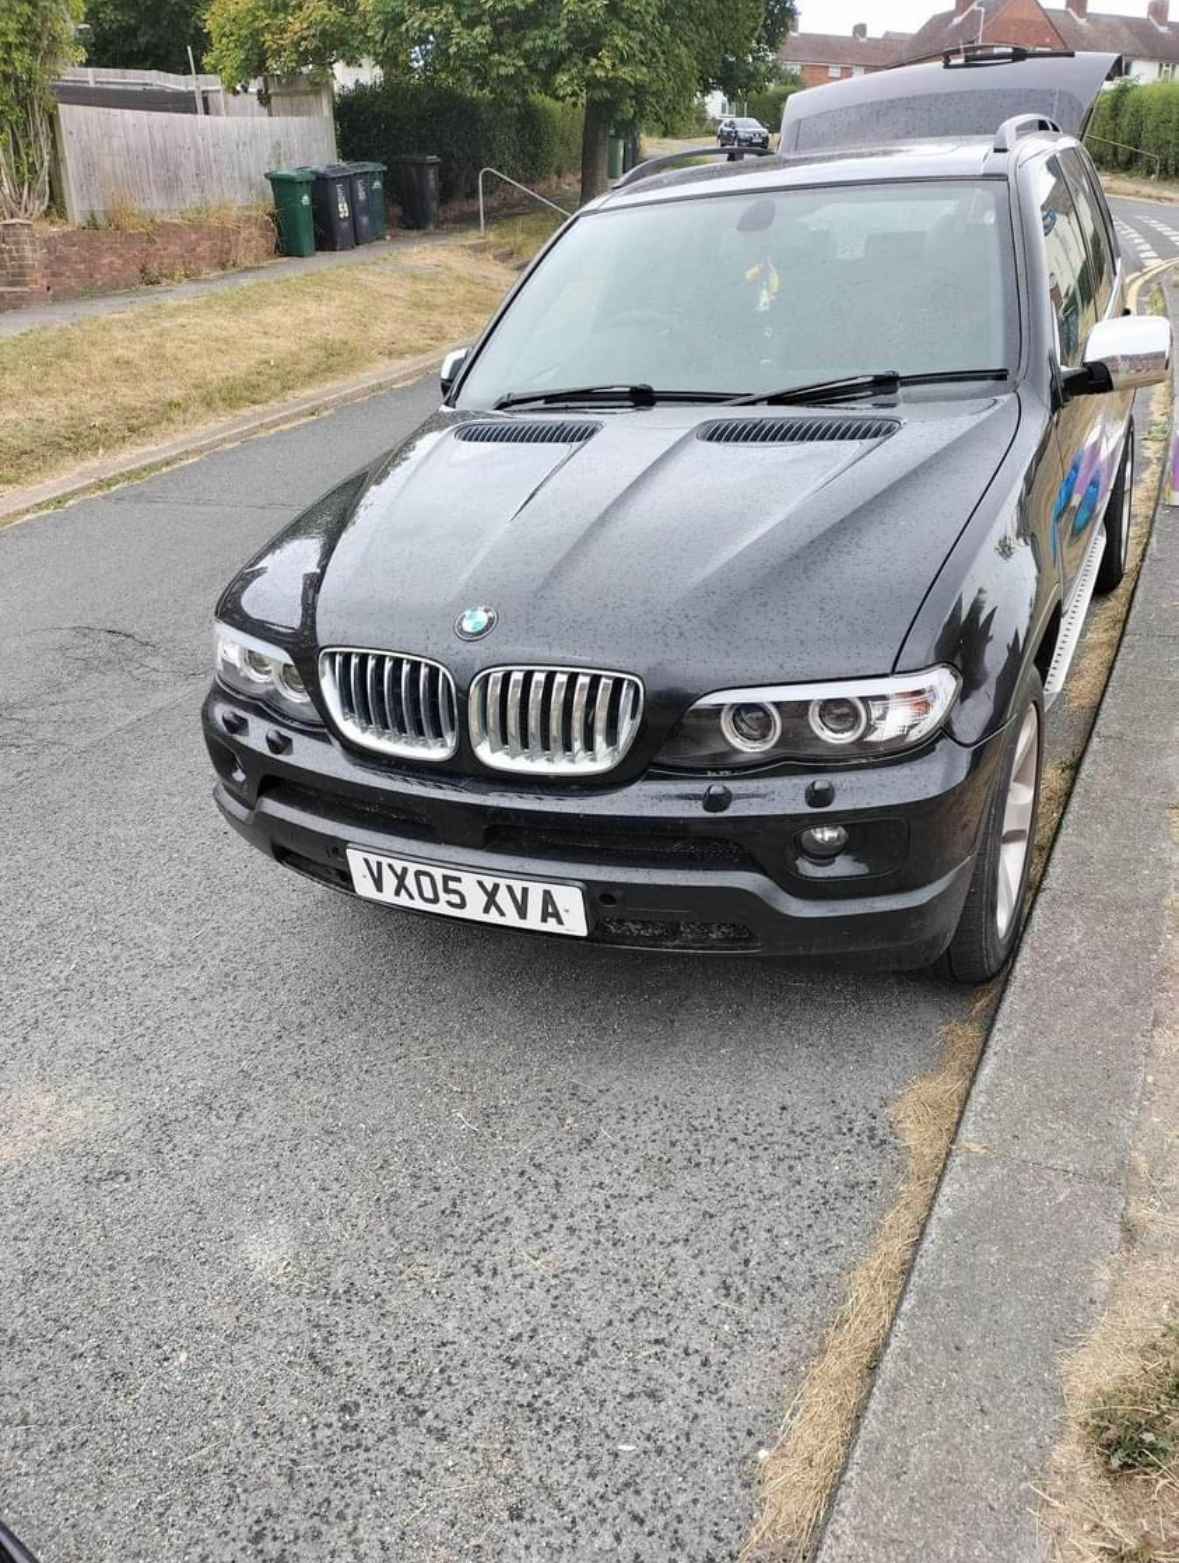 Photograph of VX05 XVA - a Black BMW X5 parked in Hollingdean by a non-resident and stored here whilst a dodgy car dealer attempts to sell it. The first of five photographs supplied by the residents of Hollingdean.